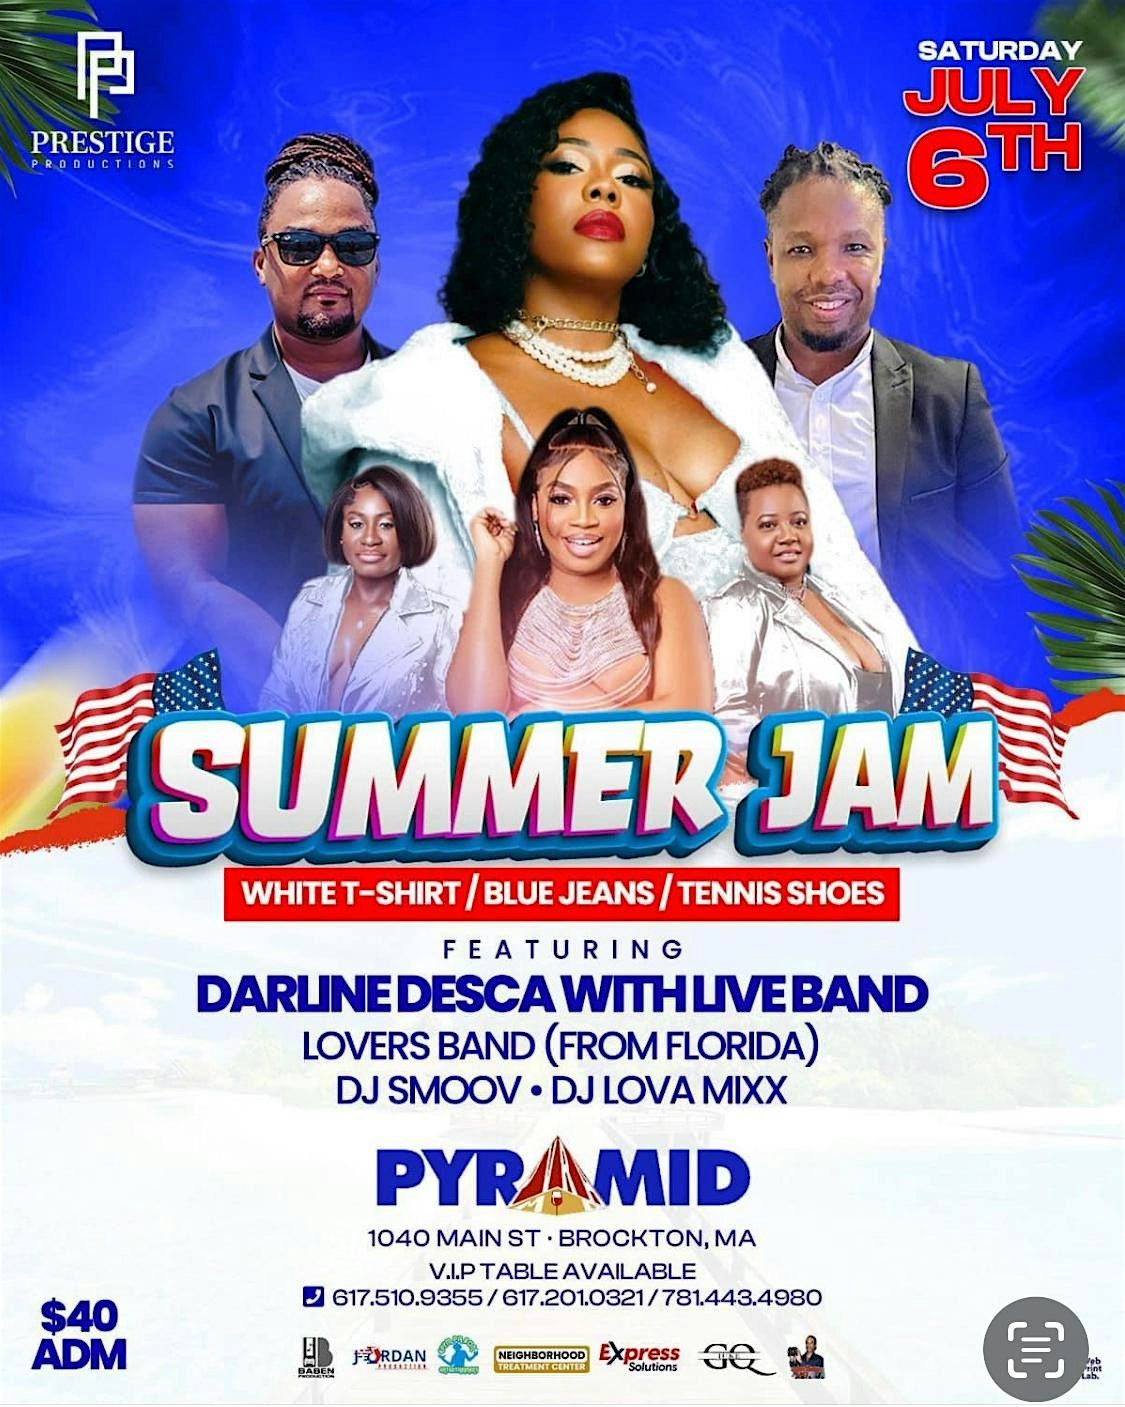 Summer jam with Darline Desca and lovers Band